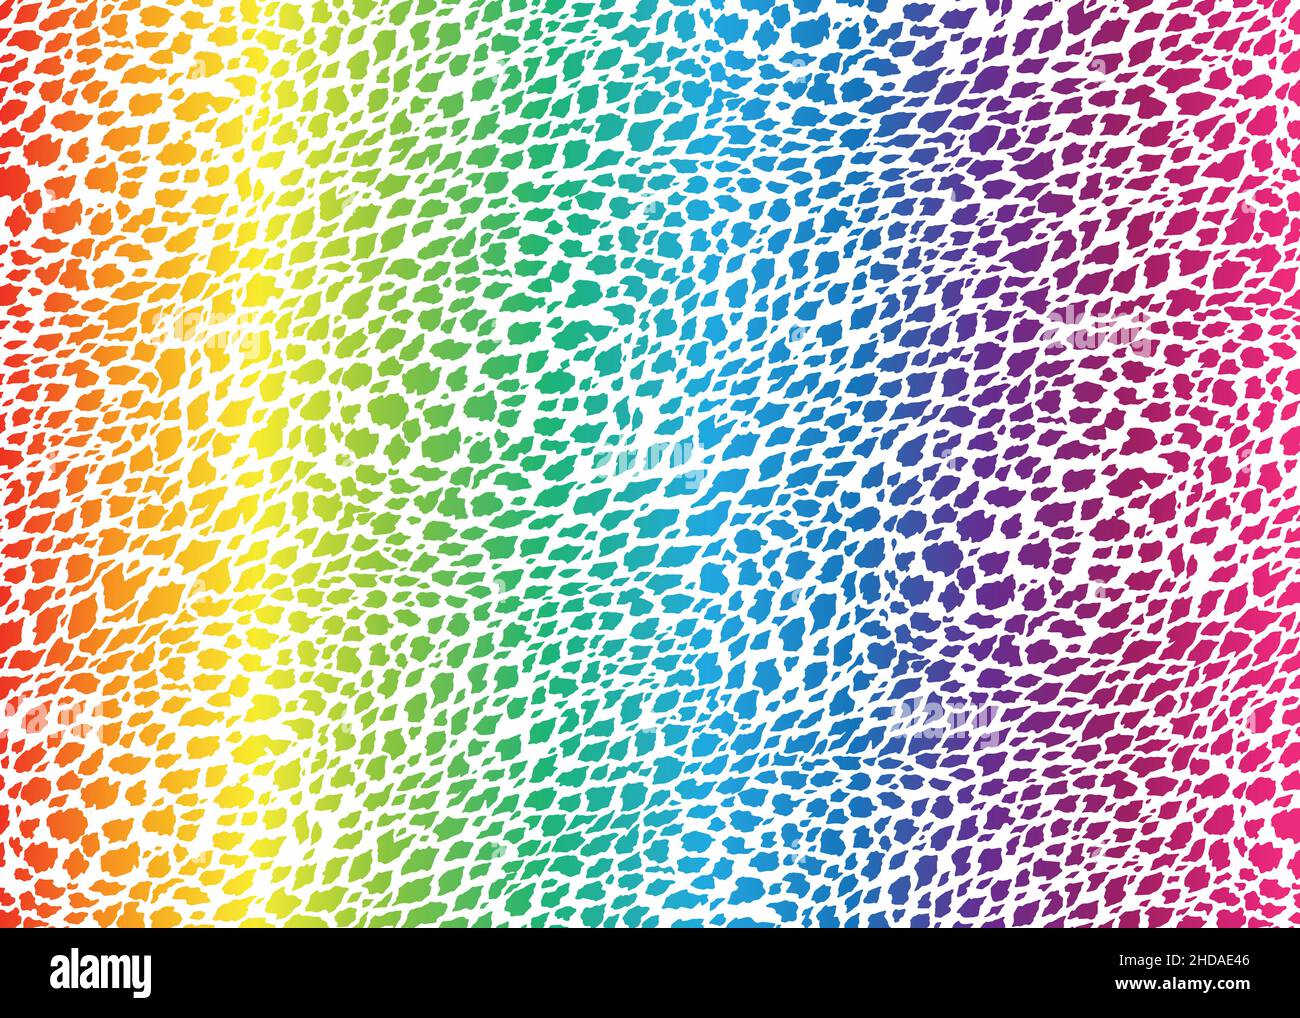 Colorful leopard seamless pattern. Claassic rainbow colored